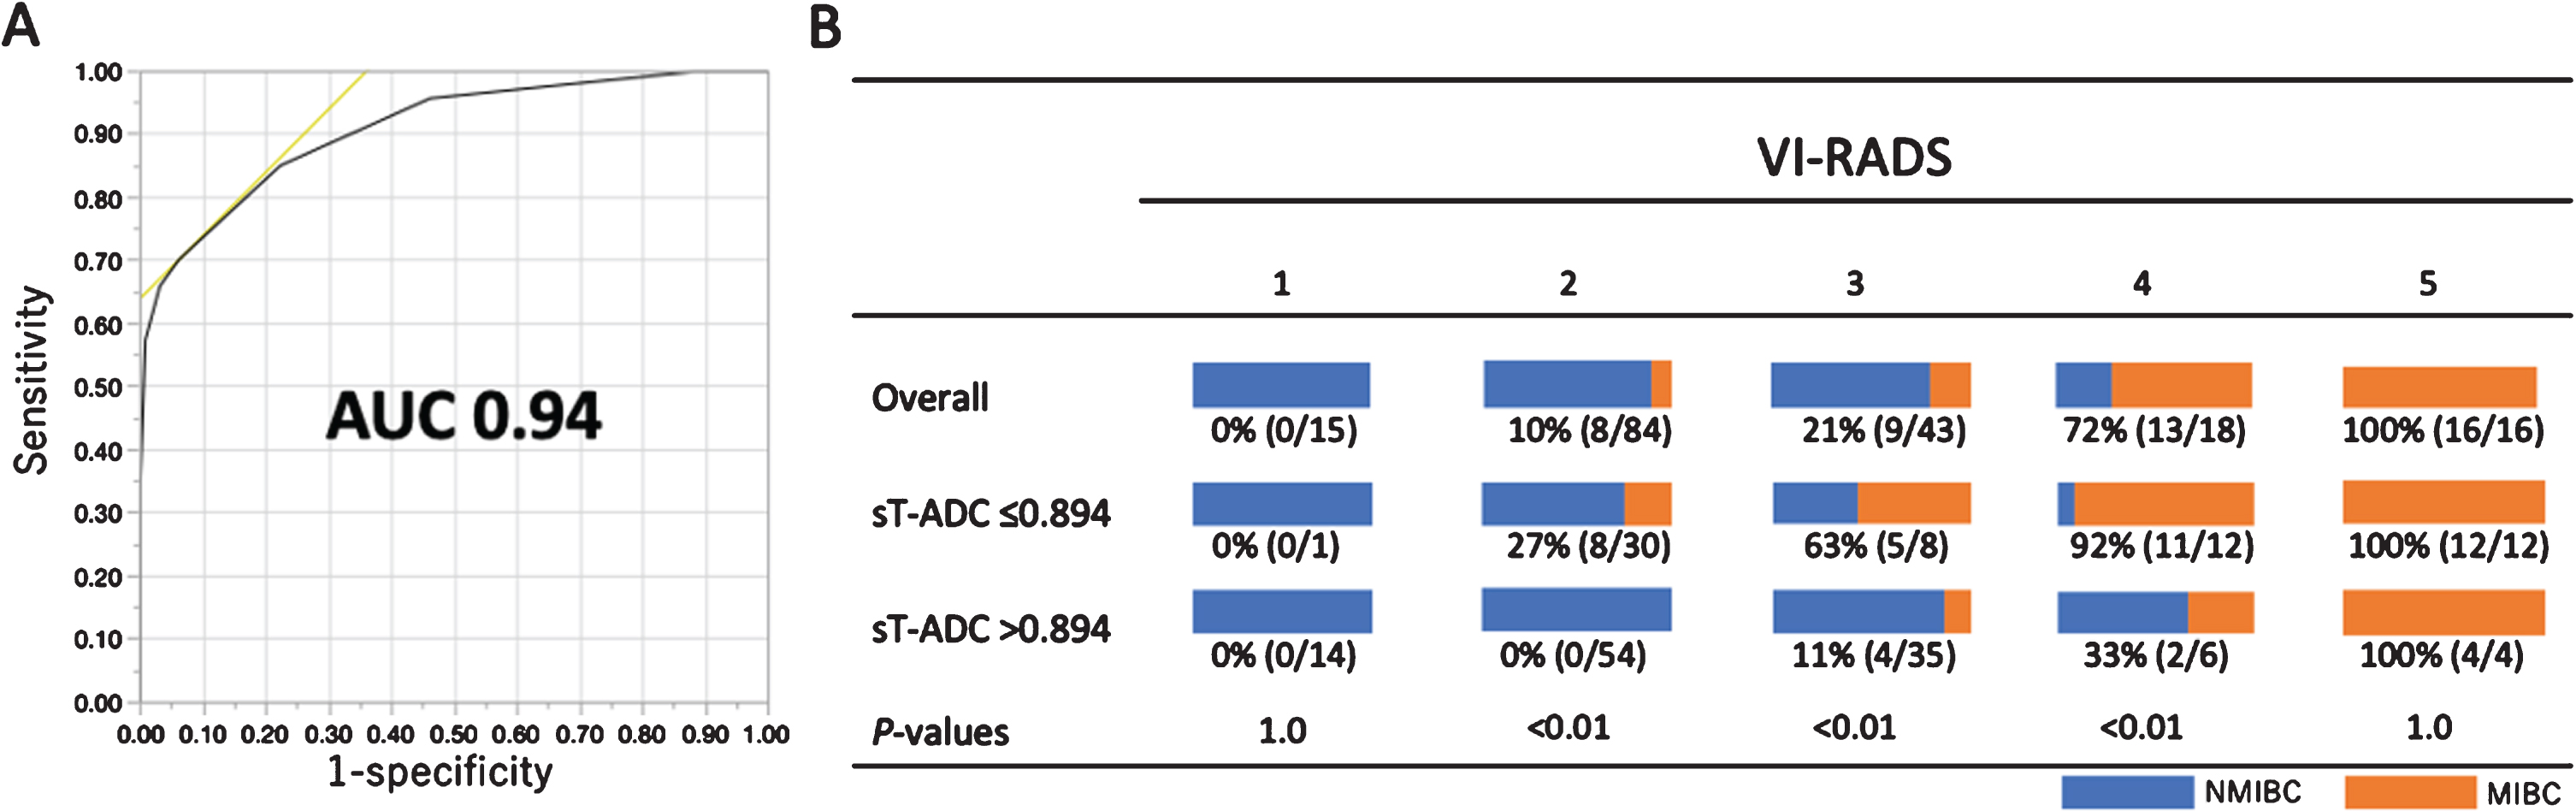 Incorporation of standardized tumor ADC (sT-ADC) values into the Vesical Imaging-Reporting And Data System (VI-RADS) to detect muscle invasion. (A) The ROC curve of VI-RADS/ADC. (B) Distribution of muscle-invasive disease (MIBC) according to sT-ADC for each VI-RADS score.